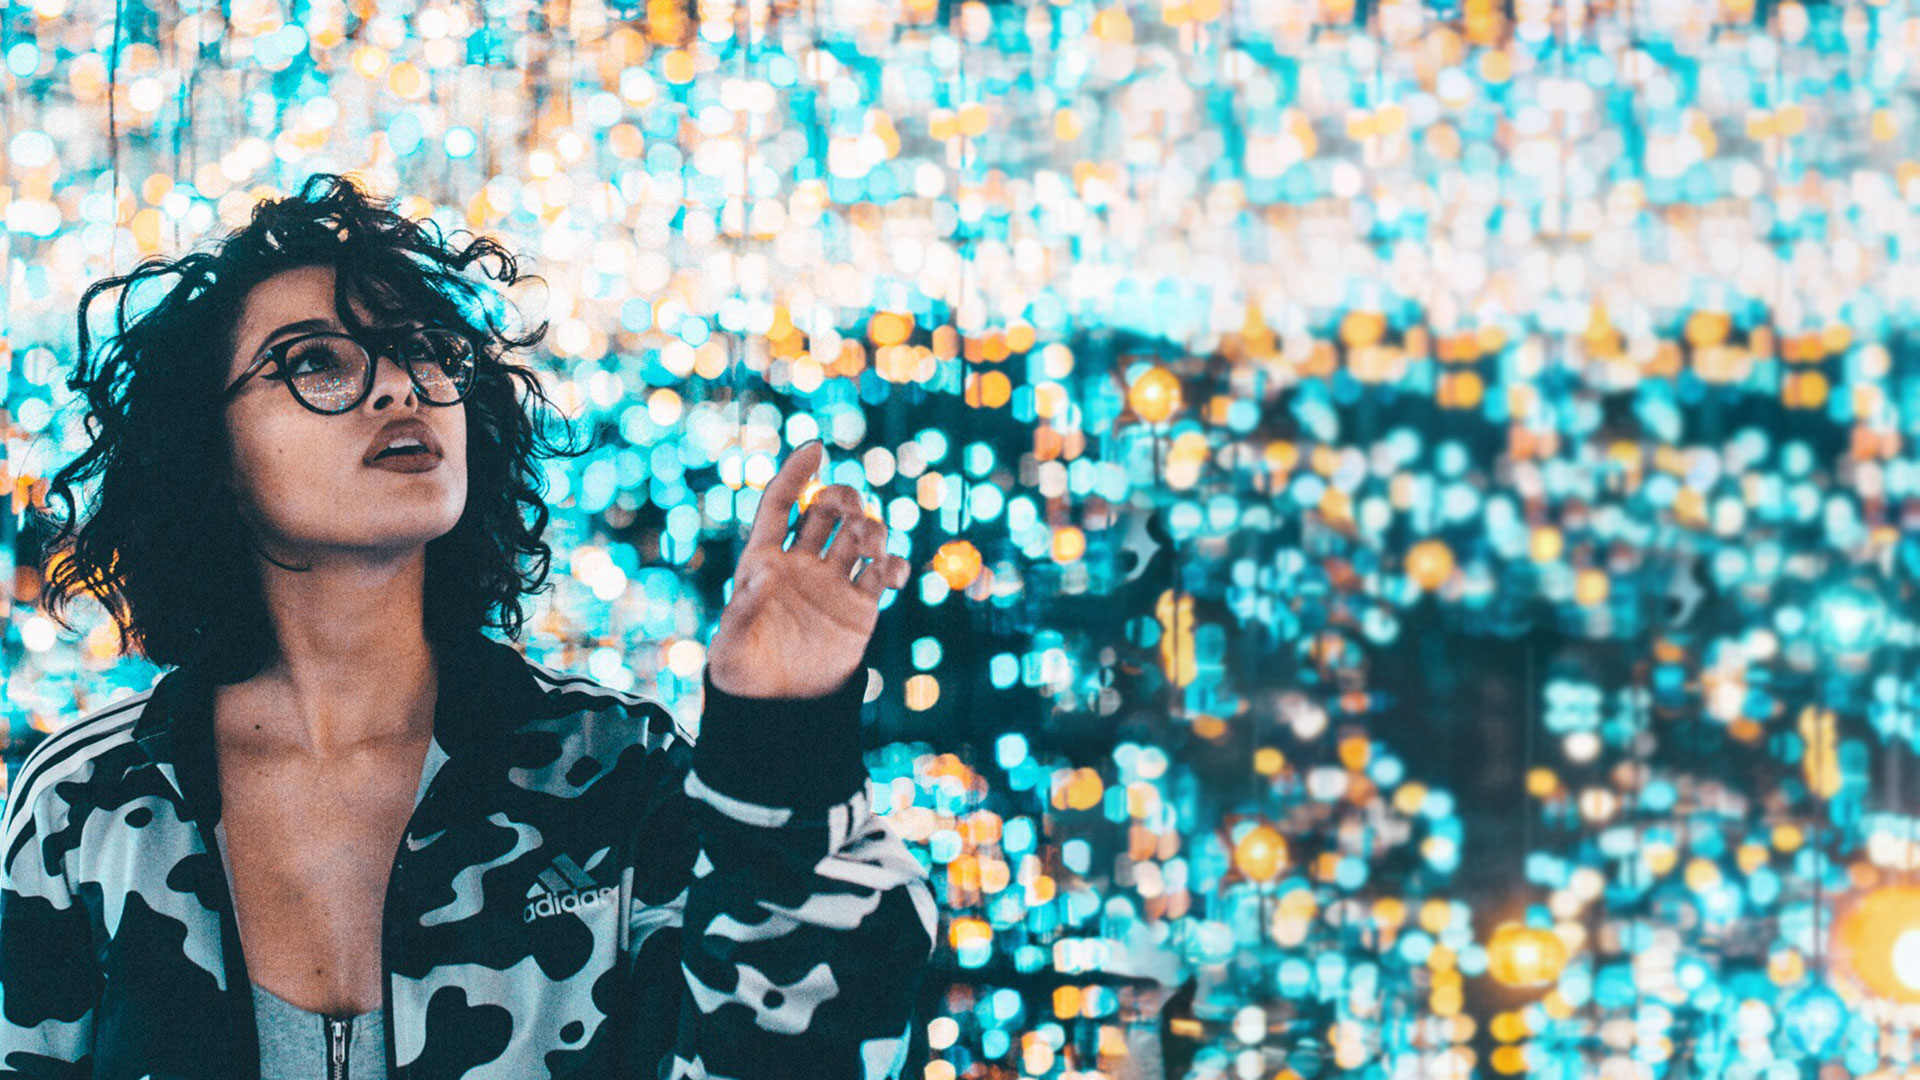 Google Analytics 4 webinar - photo of a woman with large black curly hair, surrounded by magical looking lights.